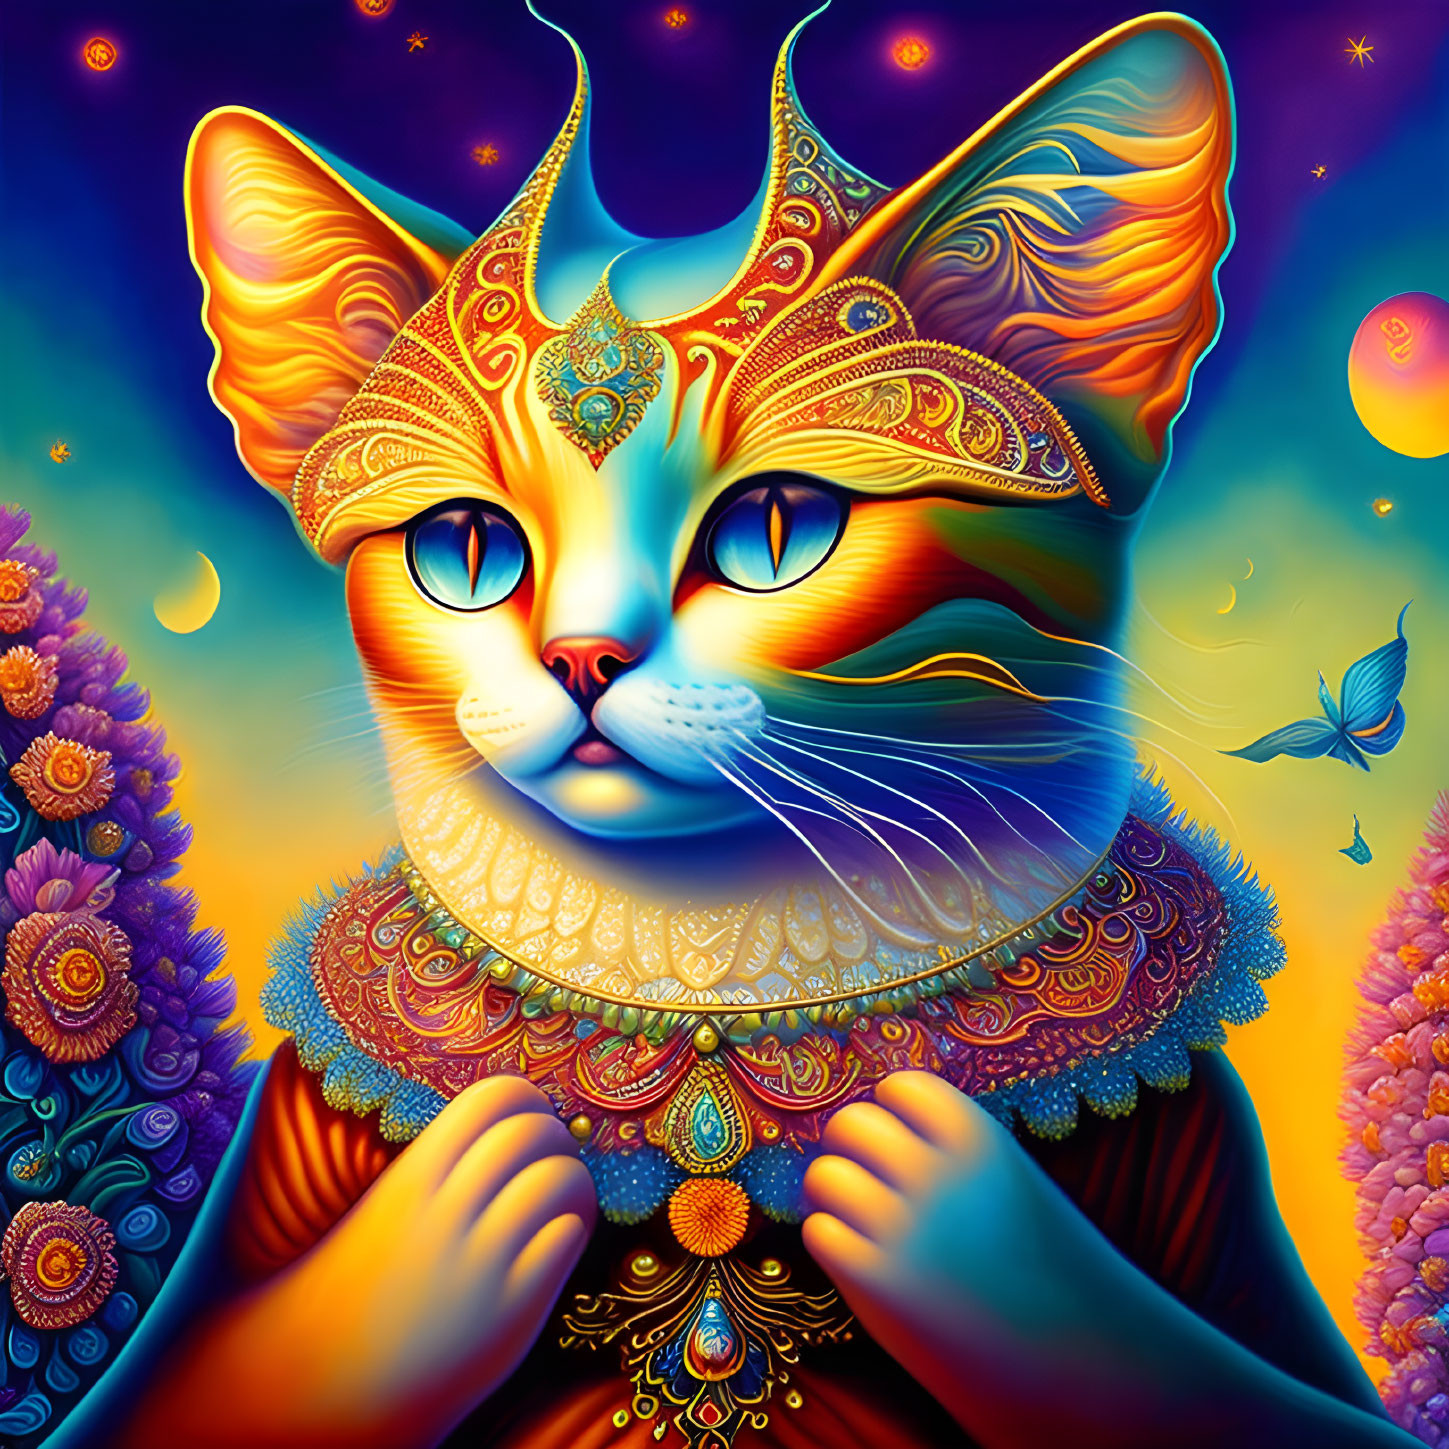 Colorful Stylized Cat Illustration with Floral and Celestial Background